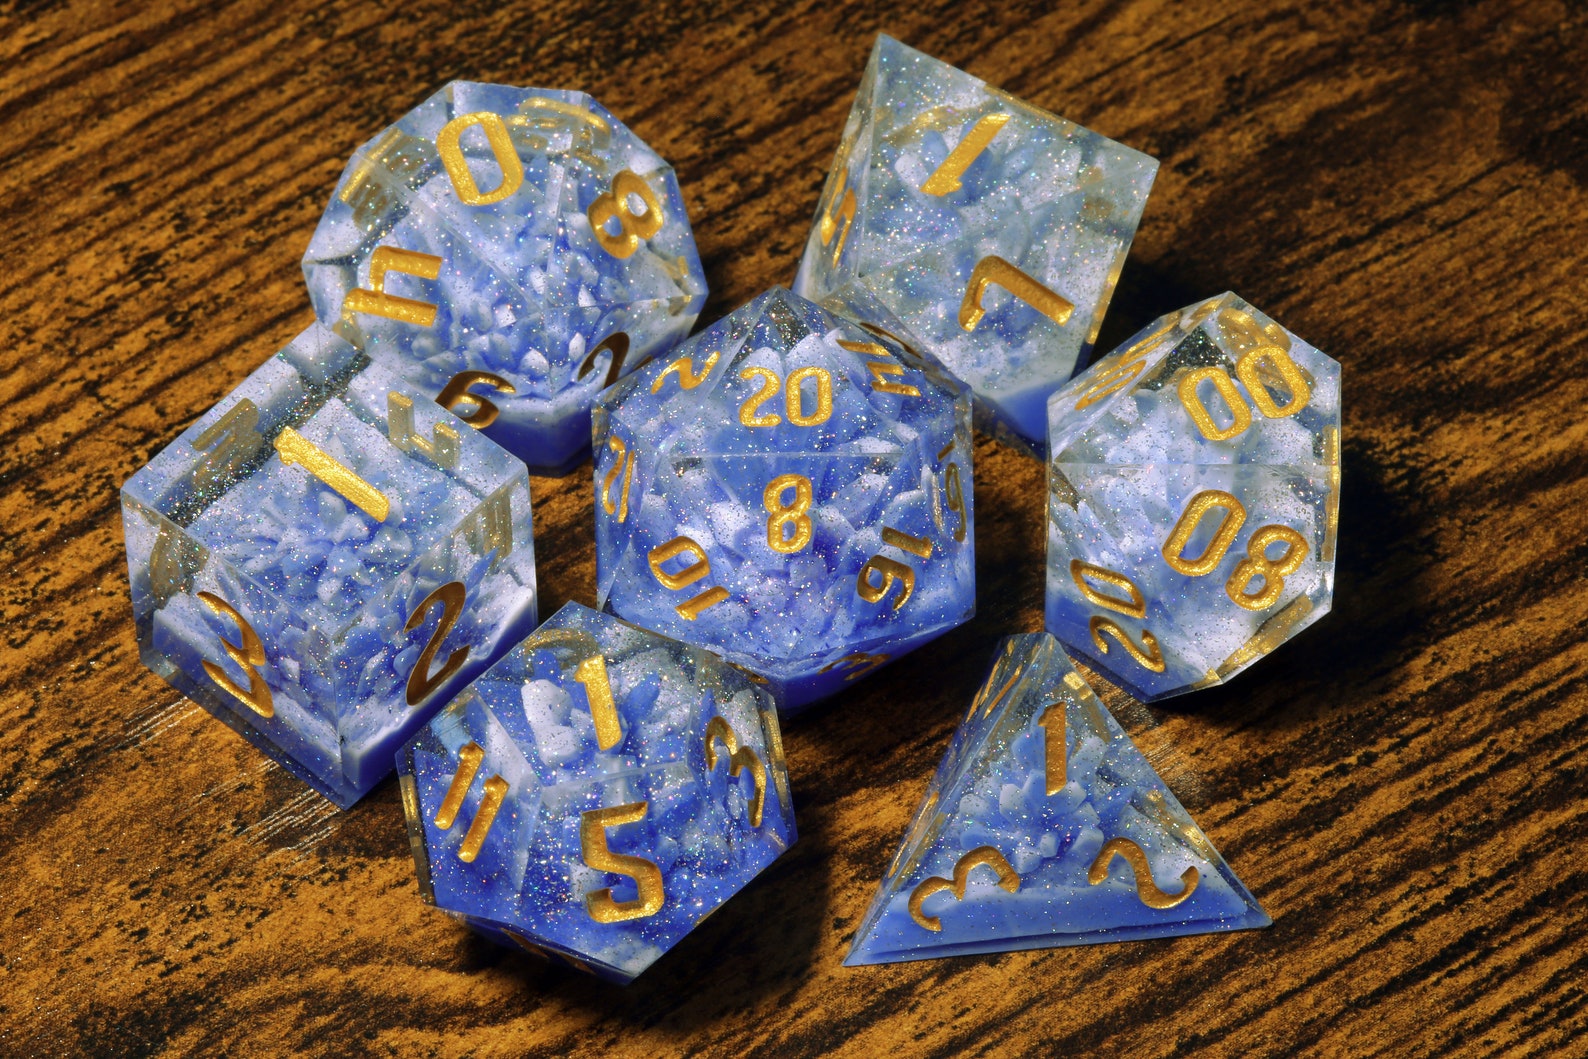 Icy Crystals dice set - Sharp edge dice set with blue crystal cluster - The Wizard's Vault